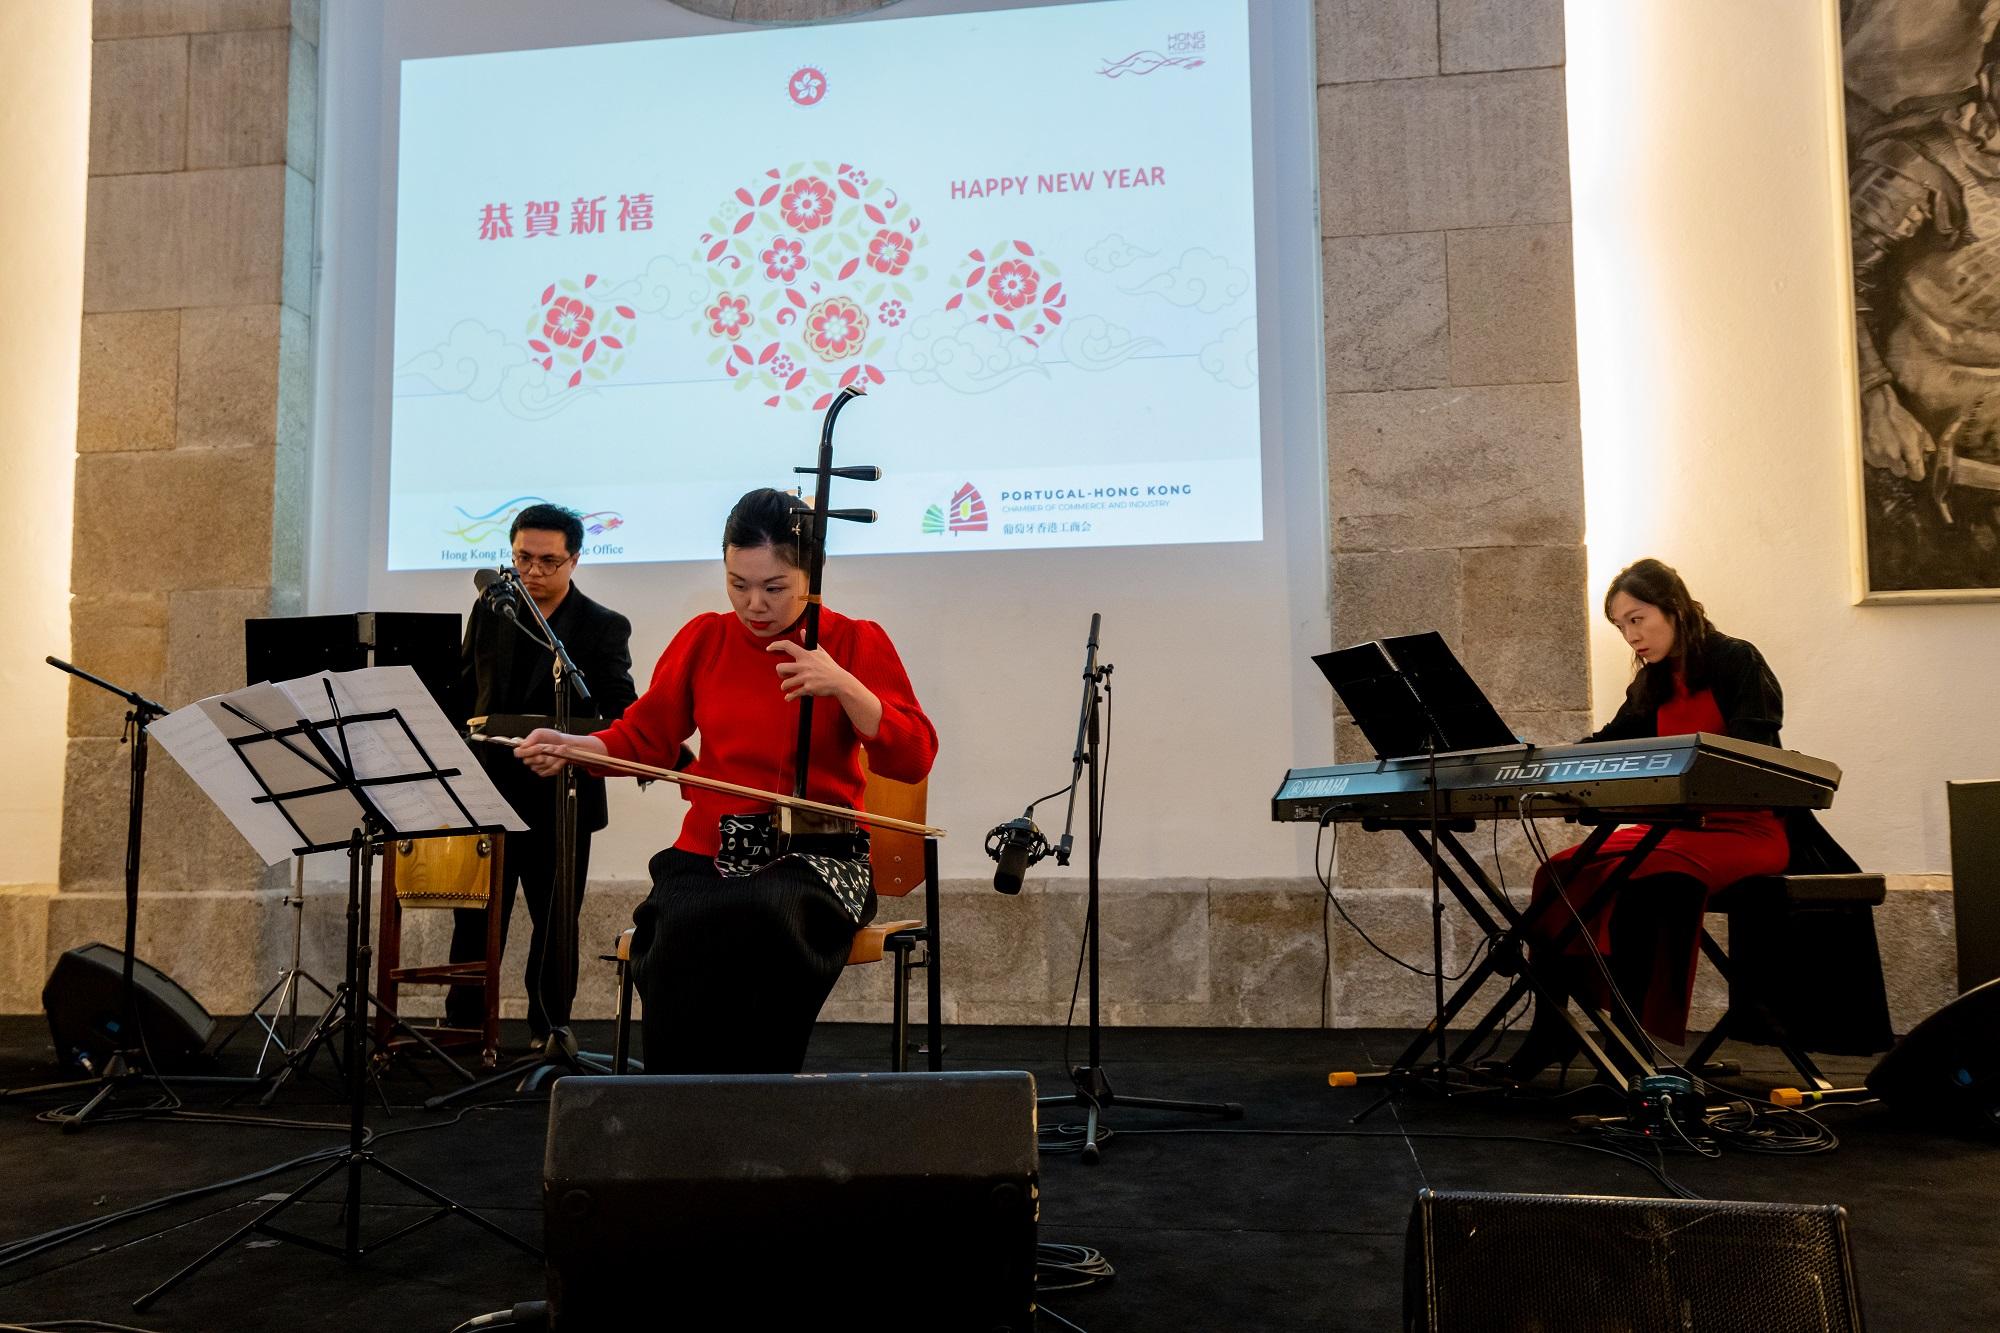 Chinese music performance by a trio of erhu, percussion and piano at the Chinese New Year reception organised by the Hong Kong Economic and Trade Office in Brussels in Porto on February 9 (Porto time).